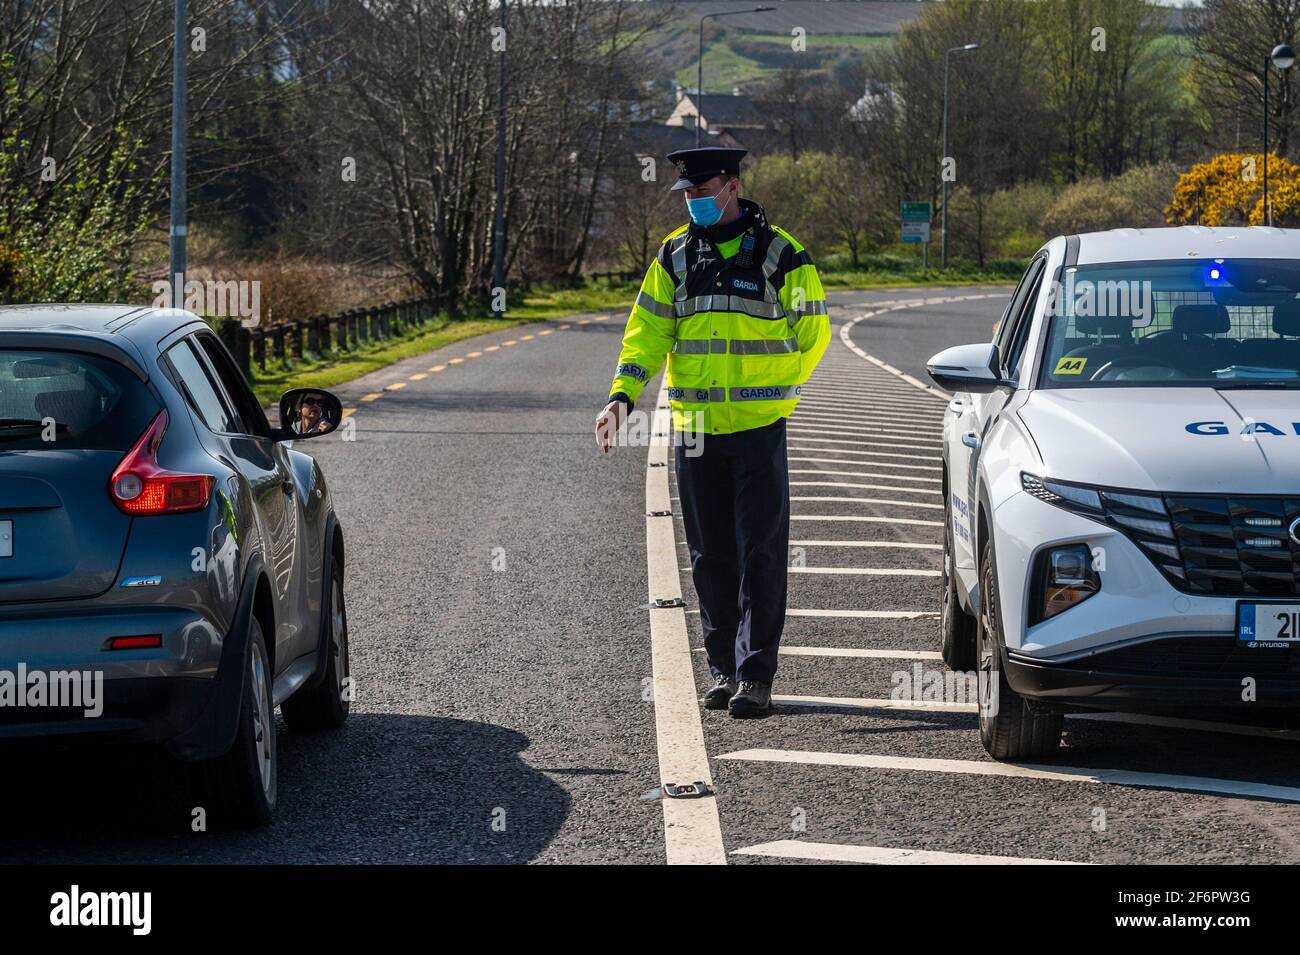 Rosscarbery, West Cork, Ireland. 2nd Apr, 2021. A Garda checkpoint was in operation in Rosscarbery today, as part of the force's crakcdown on Easter travel. Gardai have promised checkpoints across the road networks and high visibility patrols at public amenities, parks and beauty spots in an attempt to support public health guidelines in relation to COVID-19. Credit: AG News/Alamy Live News Stock Photo